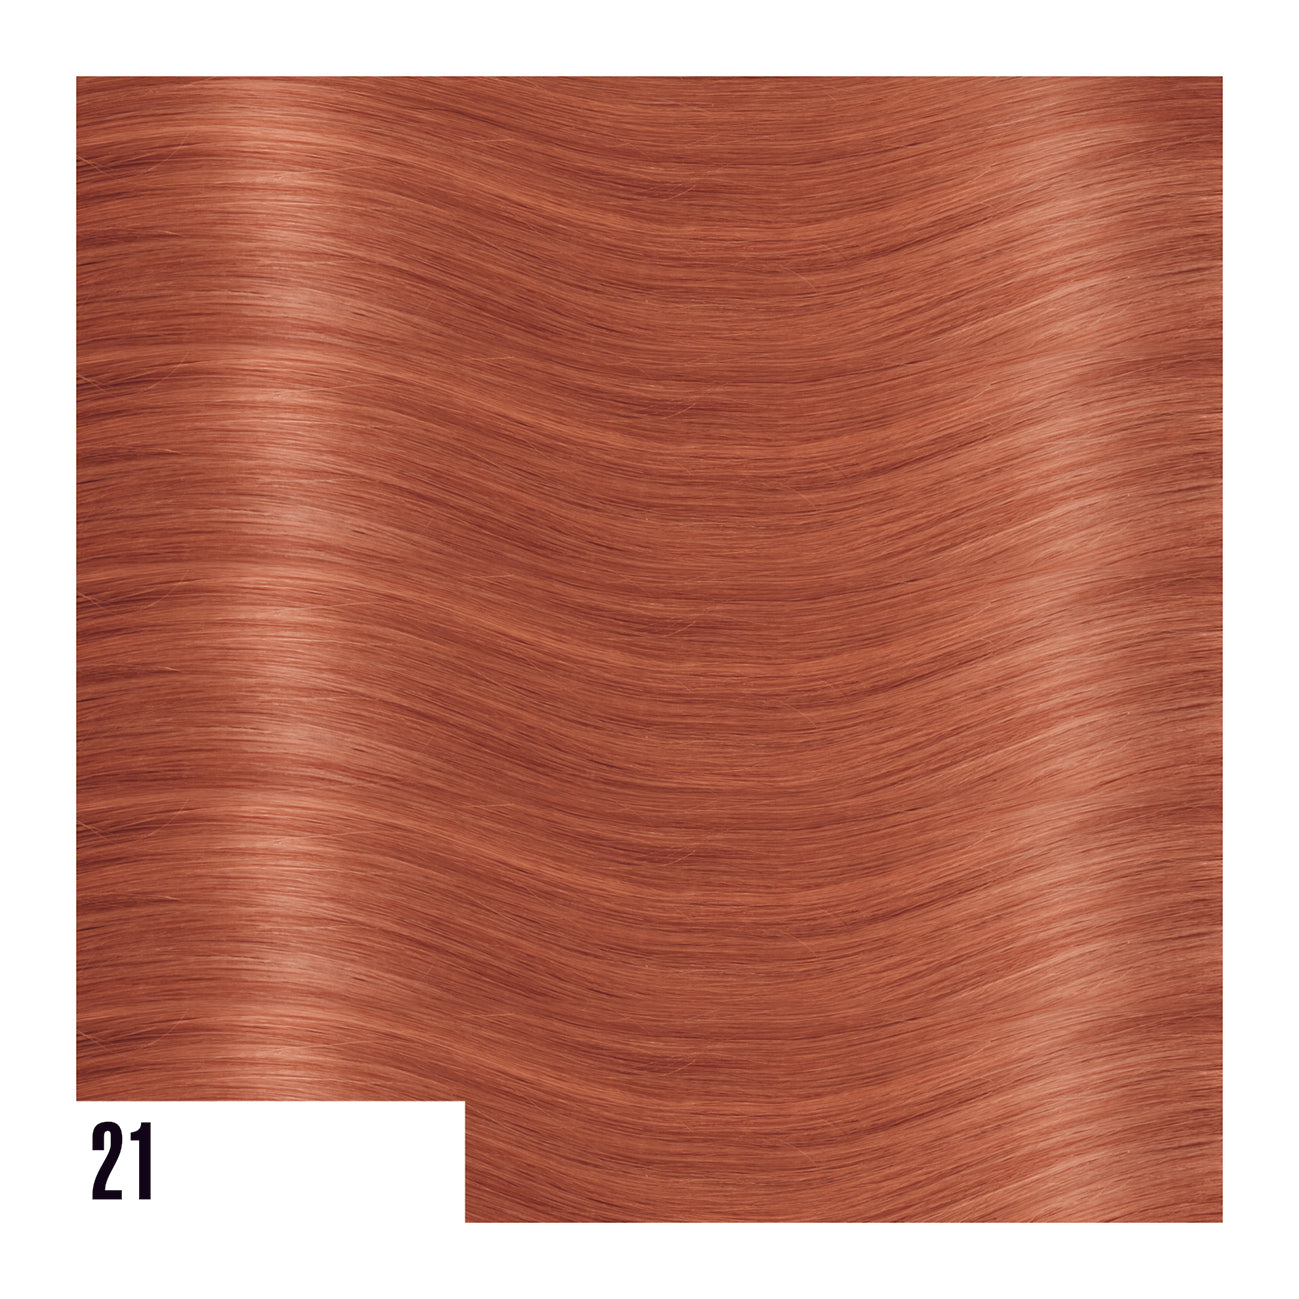 Wefts System Straight Natural Brunettes and Reds